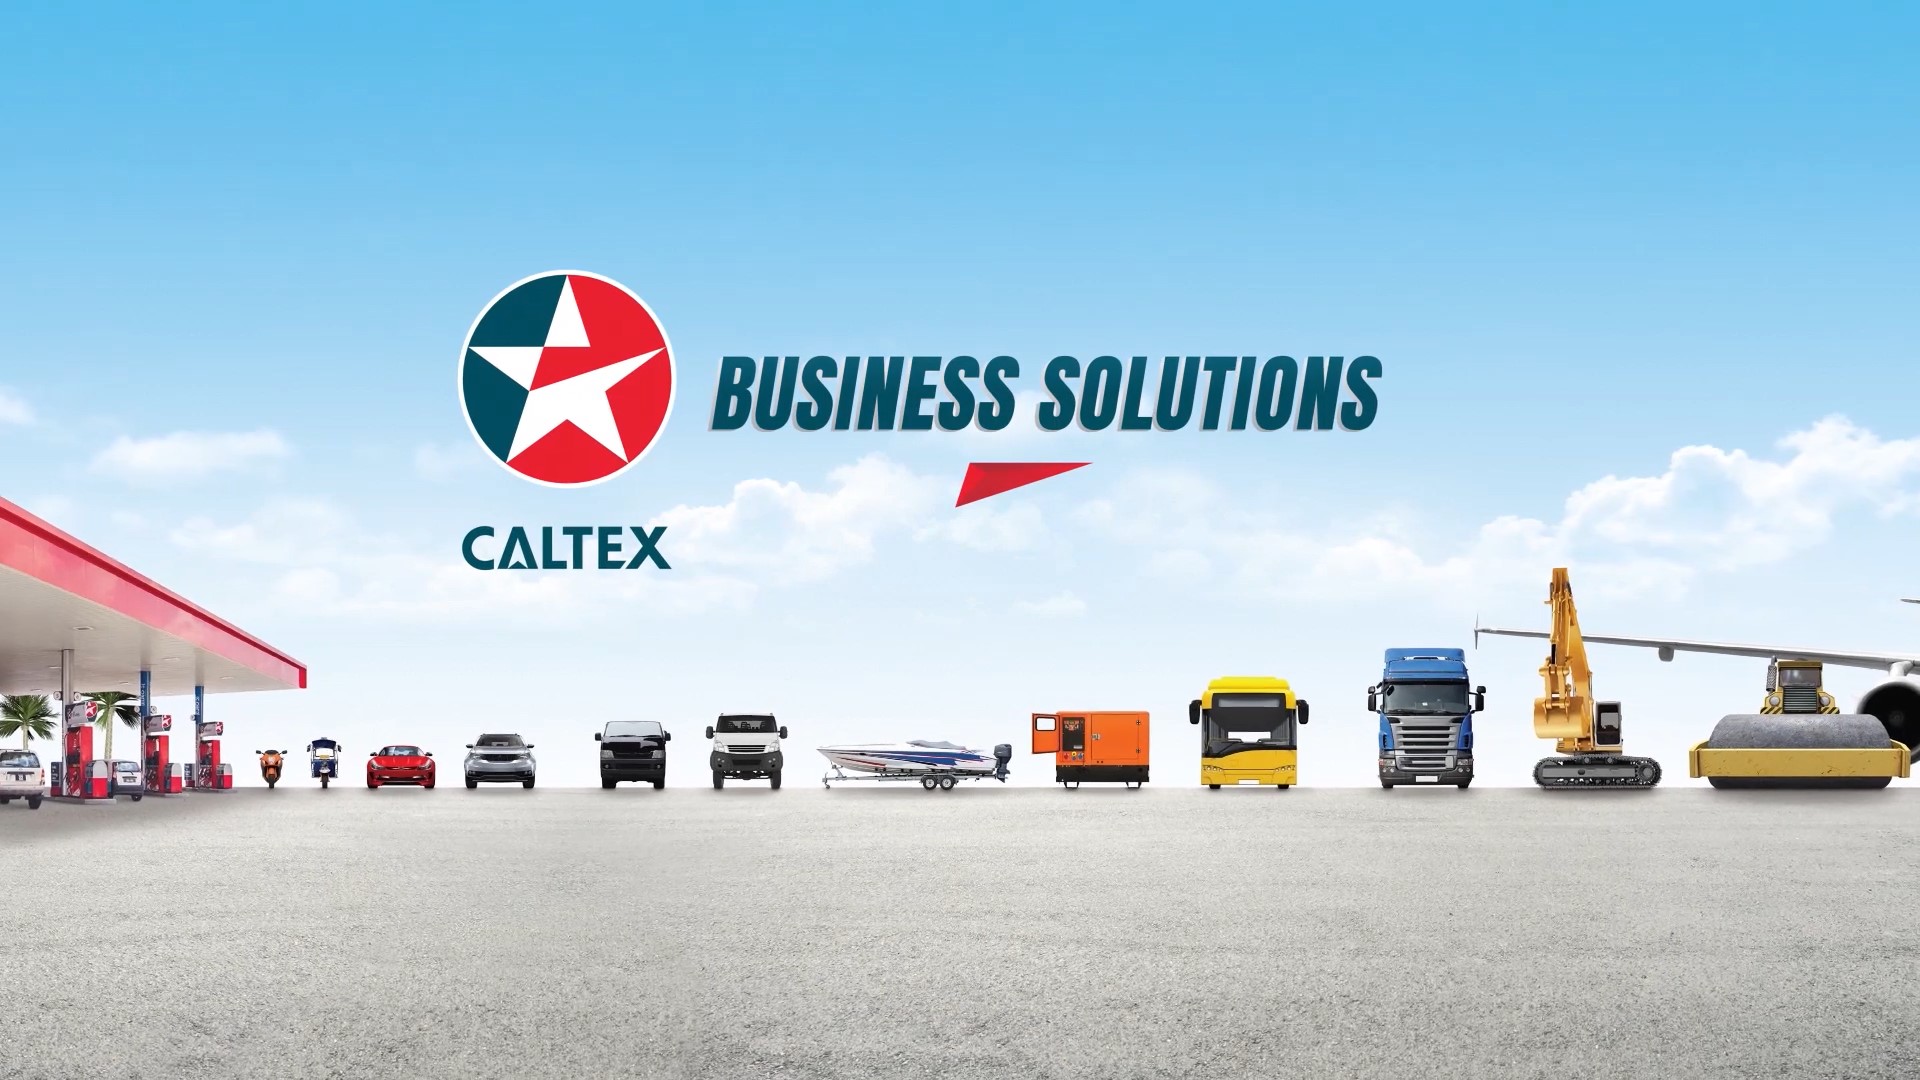 Caltex Business Solutions